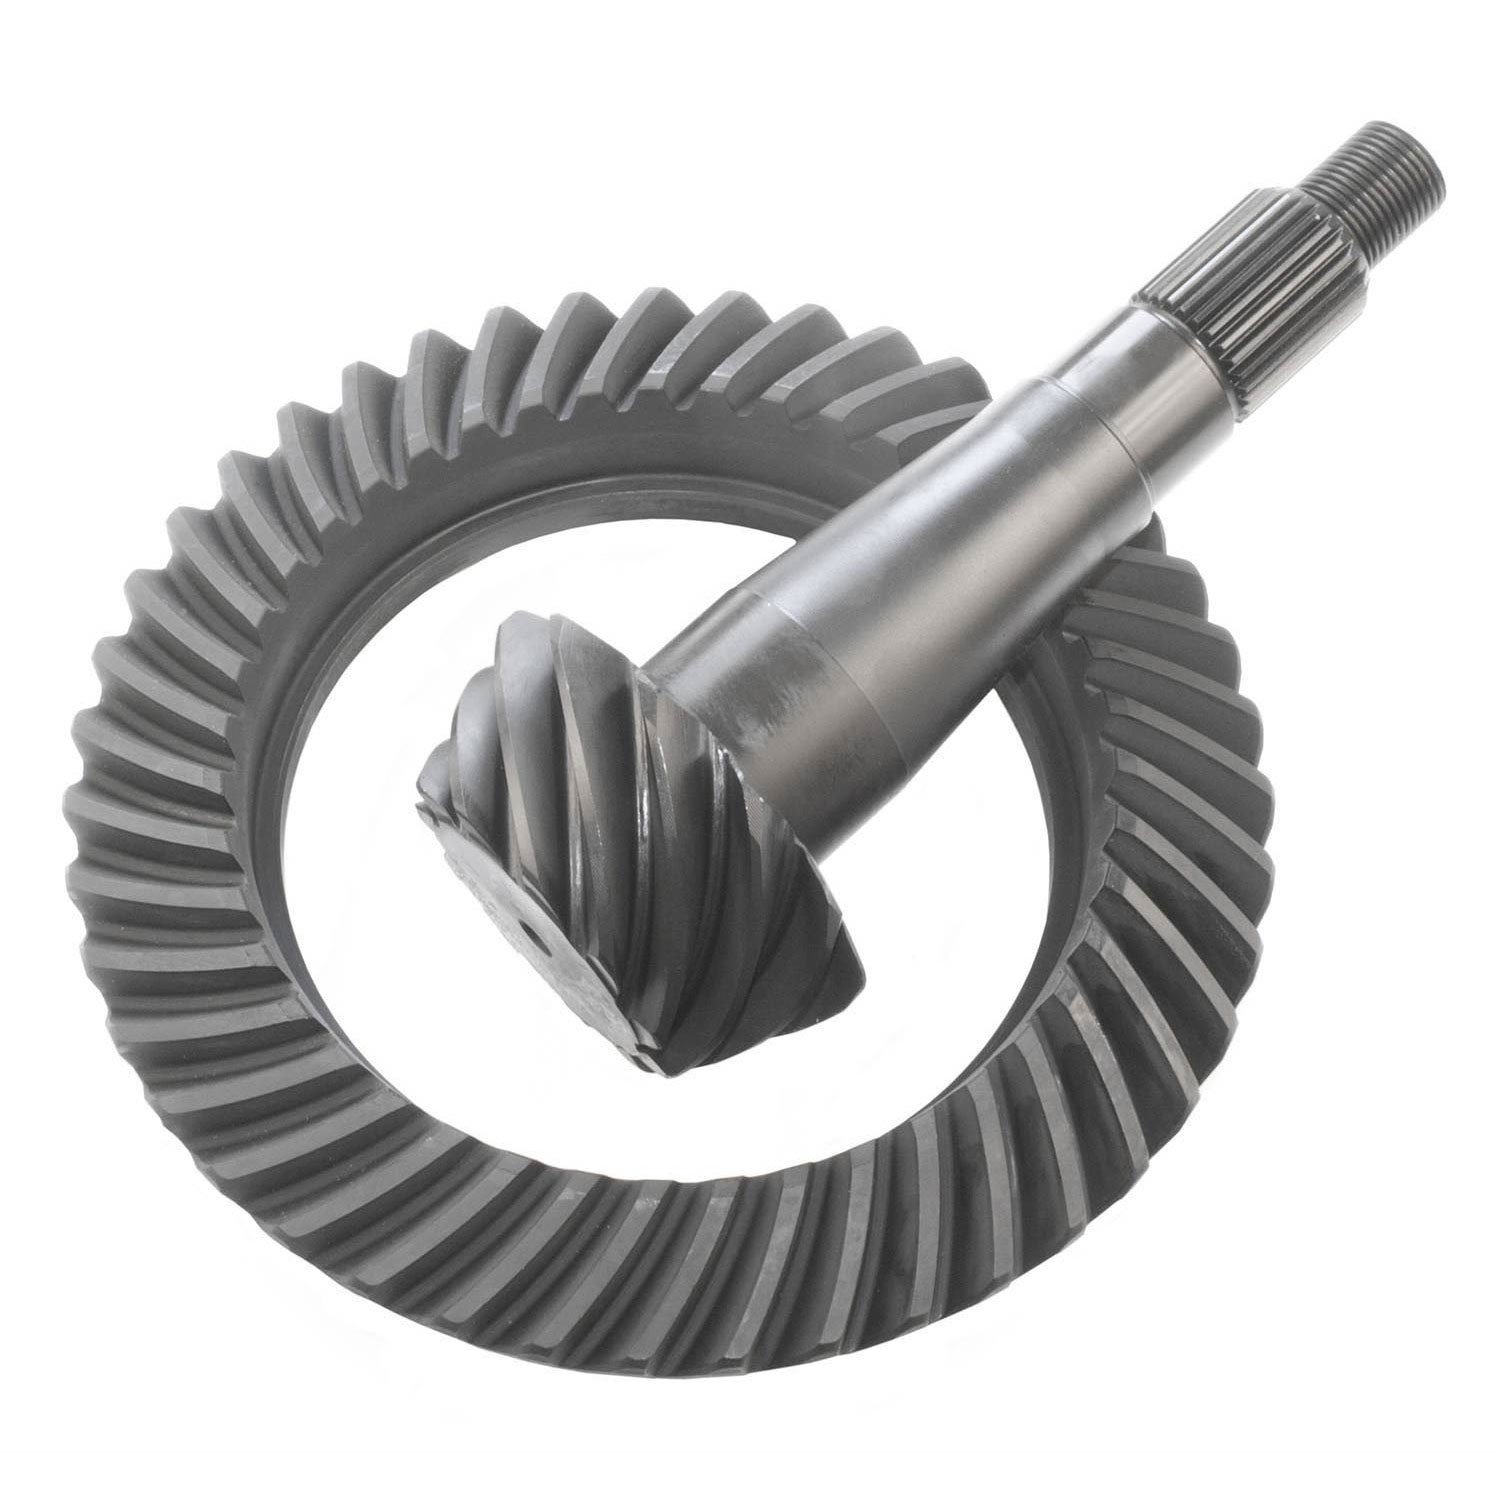 Richmond Gear 69-0059-1 Ring and Pinion Chrysler 8.75 4.10 Ratio Late 10 1 Pack 